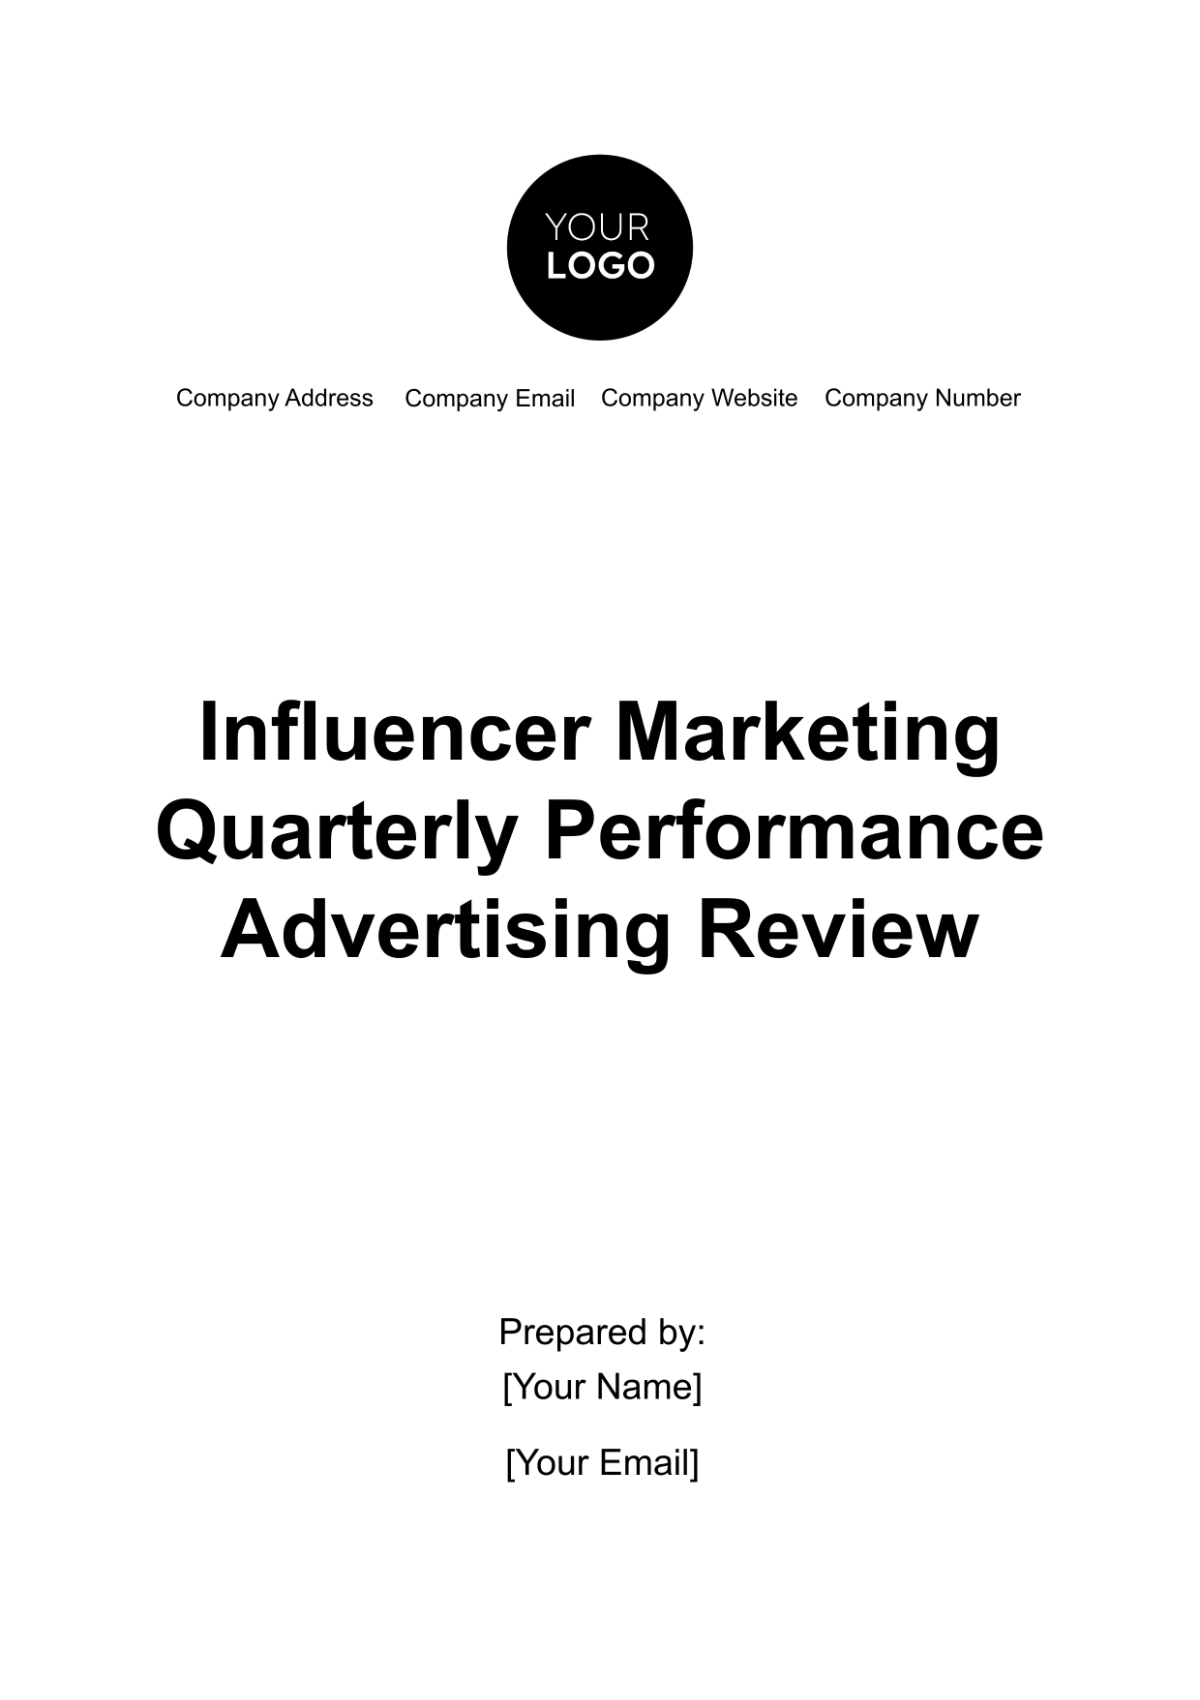 Free Influencer Marketing Quarterly Performance Advertising Review Template